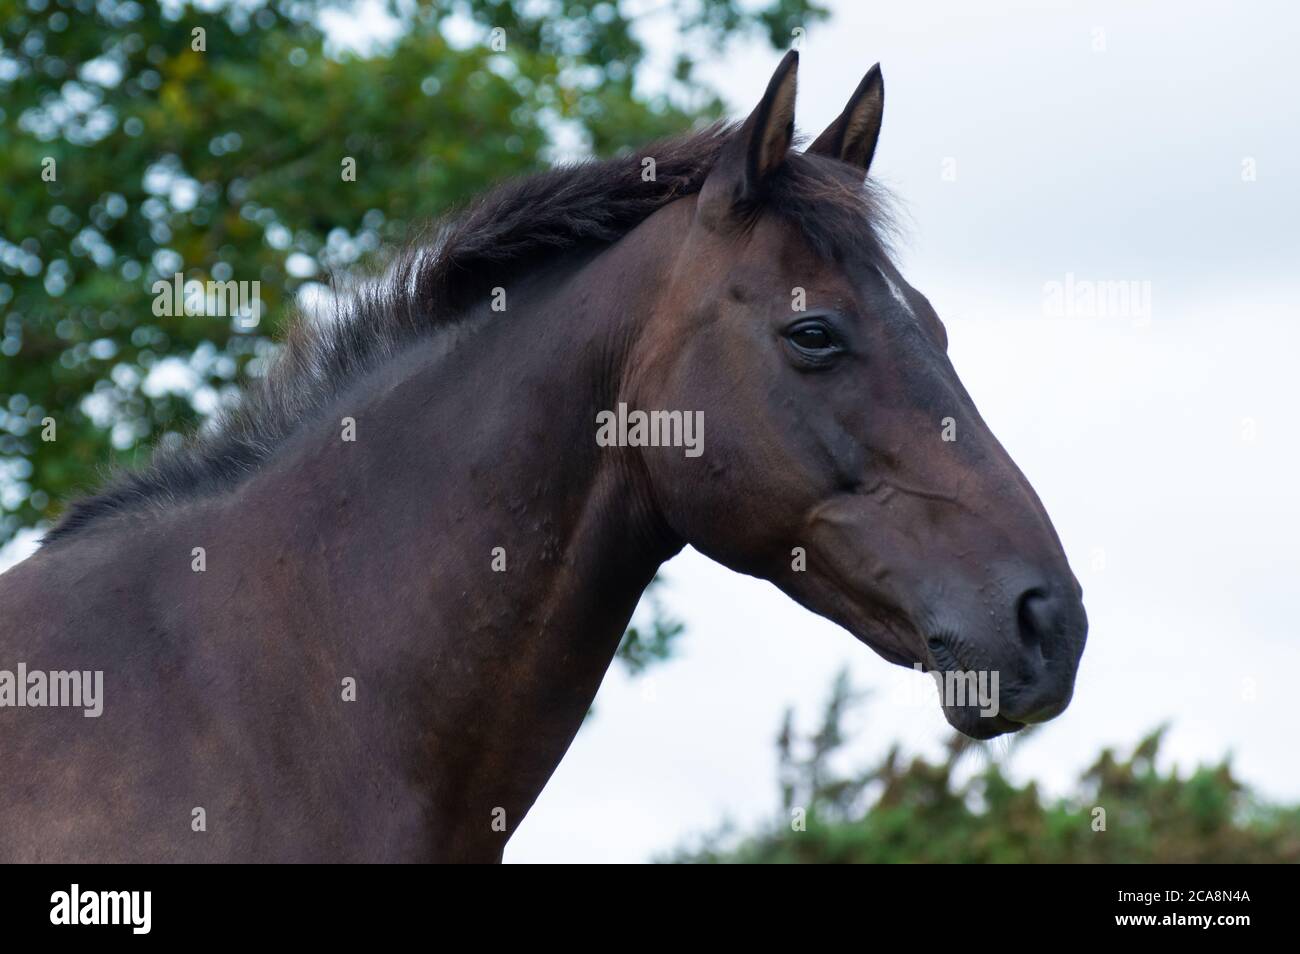 A portrait of a bay thoroughbred mare, with bokeh trees in the background. Stock Photo